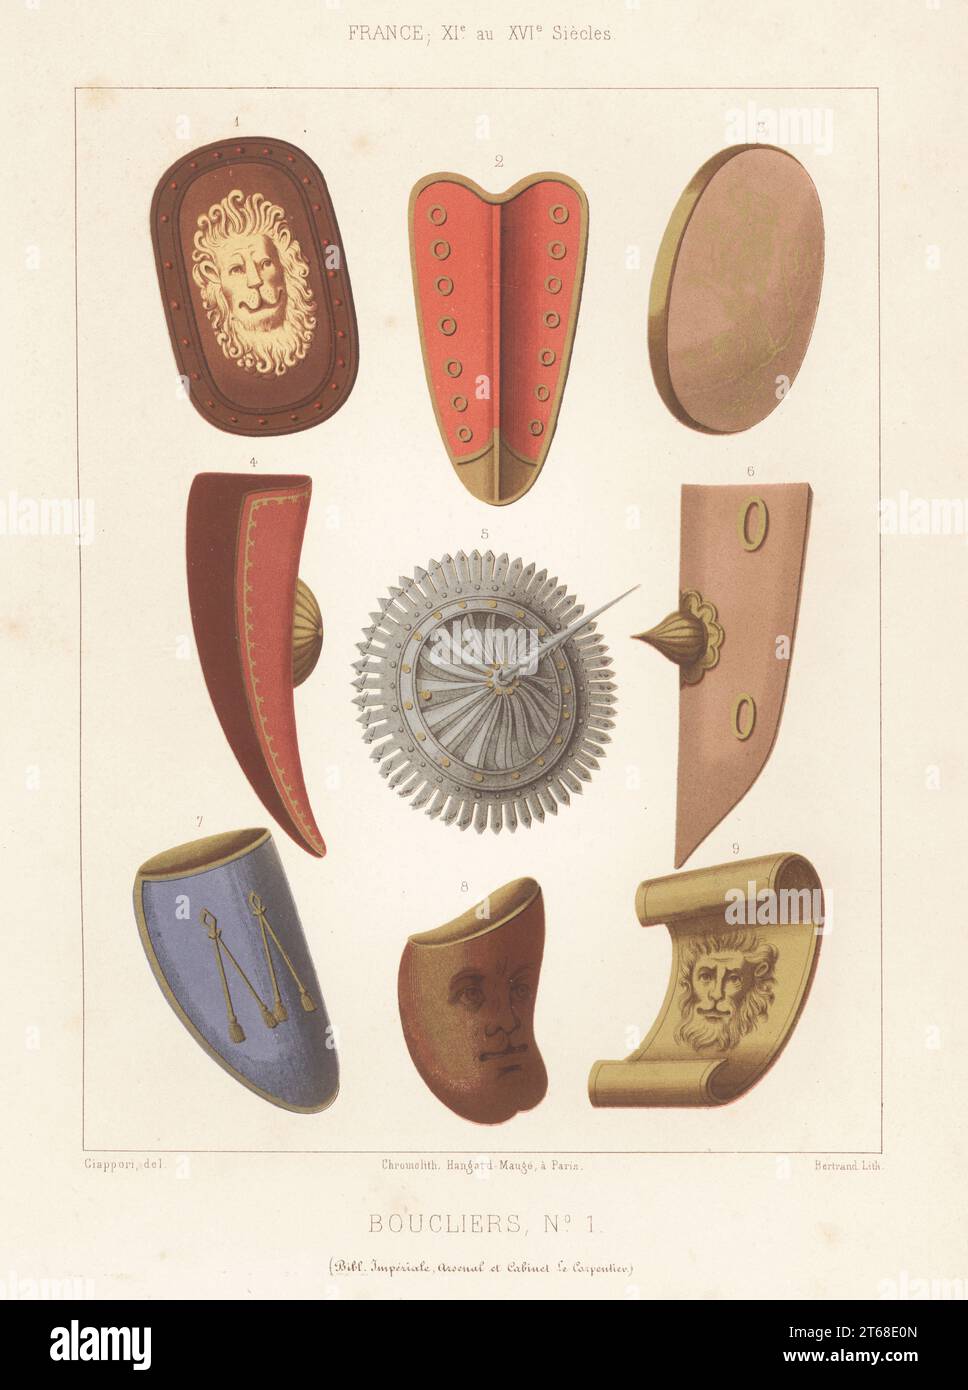 Military shields or bucklers, 11th to 16th centuries. 1,3,6 from a manuscript by Jean Fouquet, 5 from Mr. Carpentier's cabinet, and the others from MS 109 H, Bibliotheque de l'Arsenal. Boucliers, France, XIe au XVIe siecles. Chromolithograph by Bertrand after an illustration by Claudius Joseph Ciappori from Charles Louandres Les Arts Somptuaires, The Sumptuary Arts, Hangard-Mauge, Paris, 1858. Stock Photo